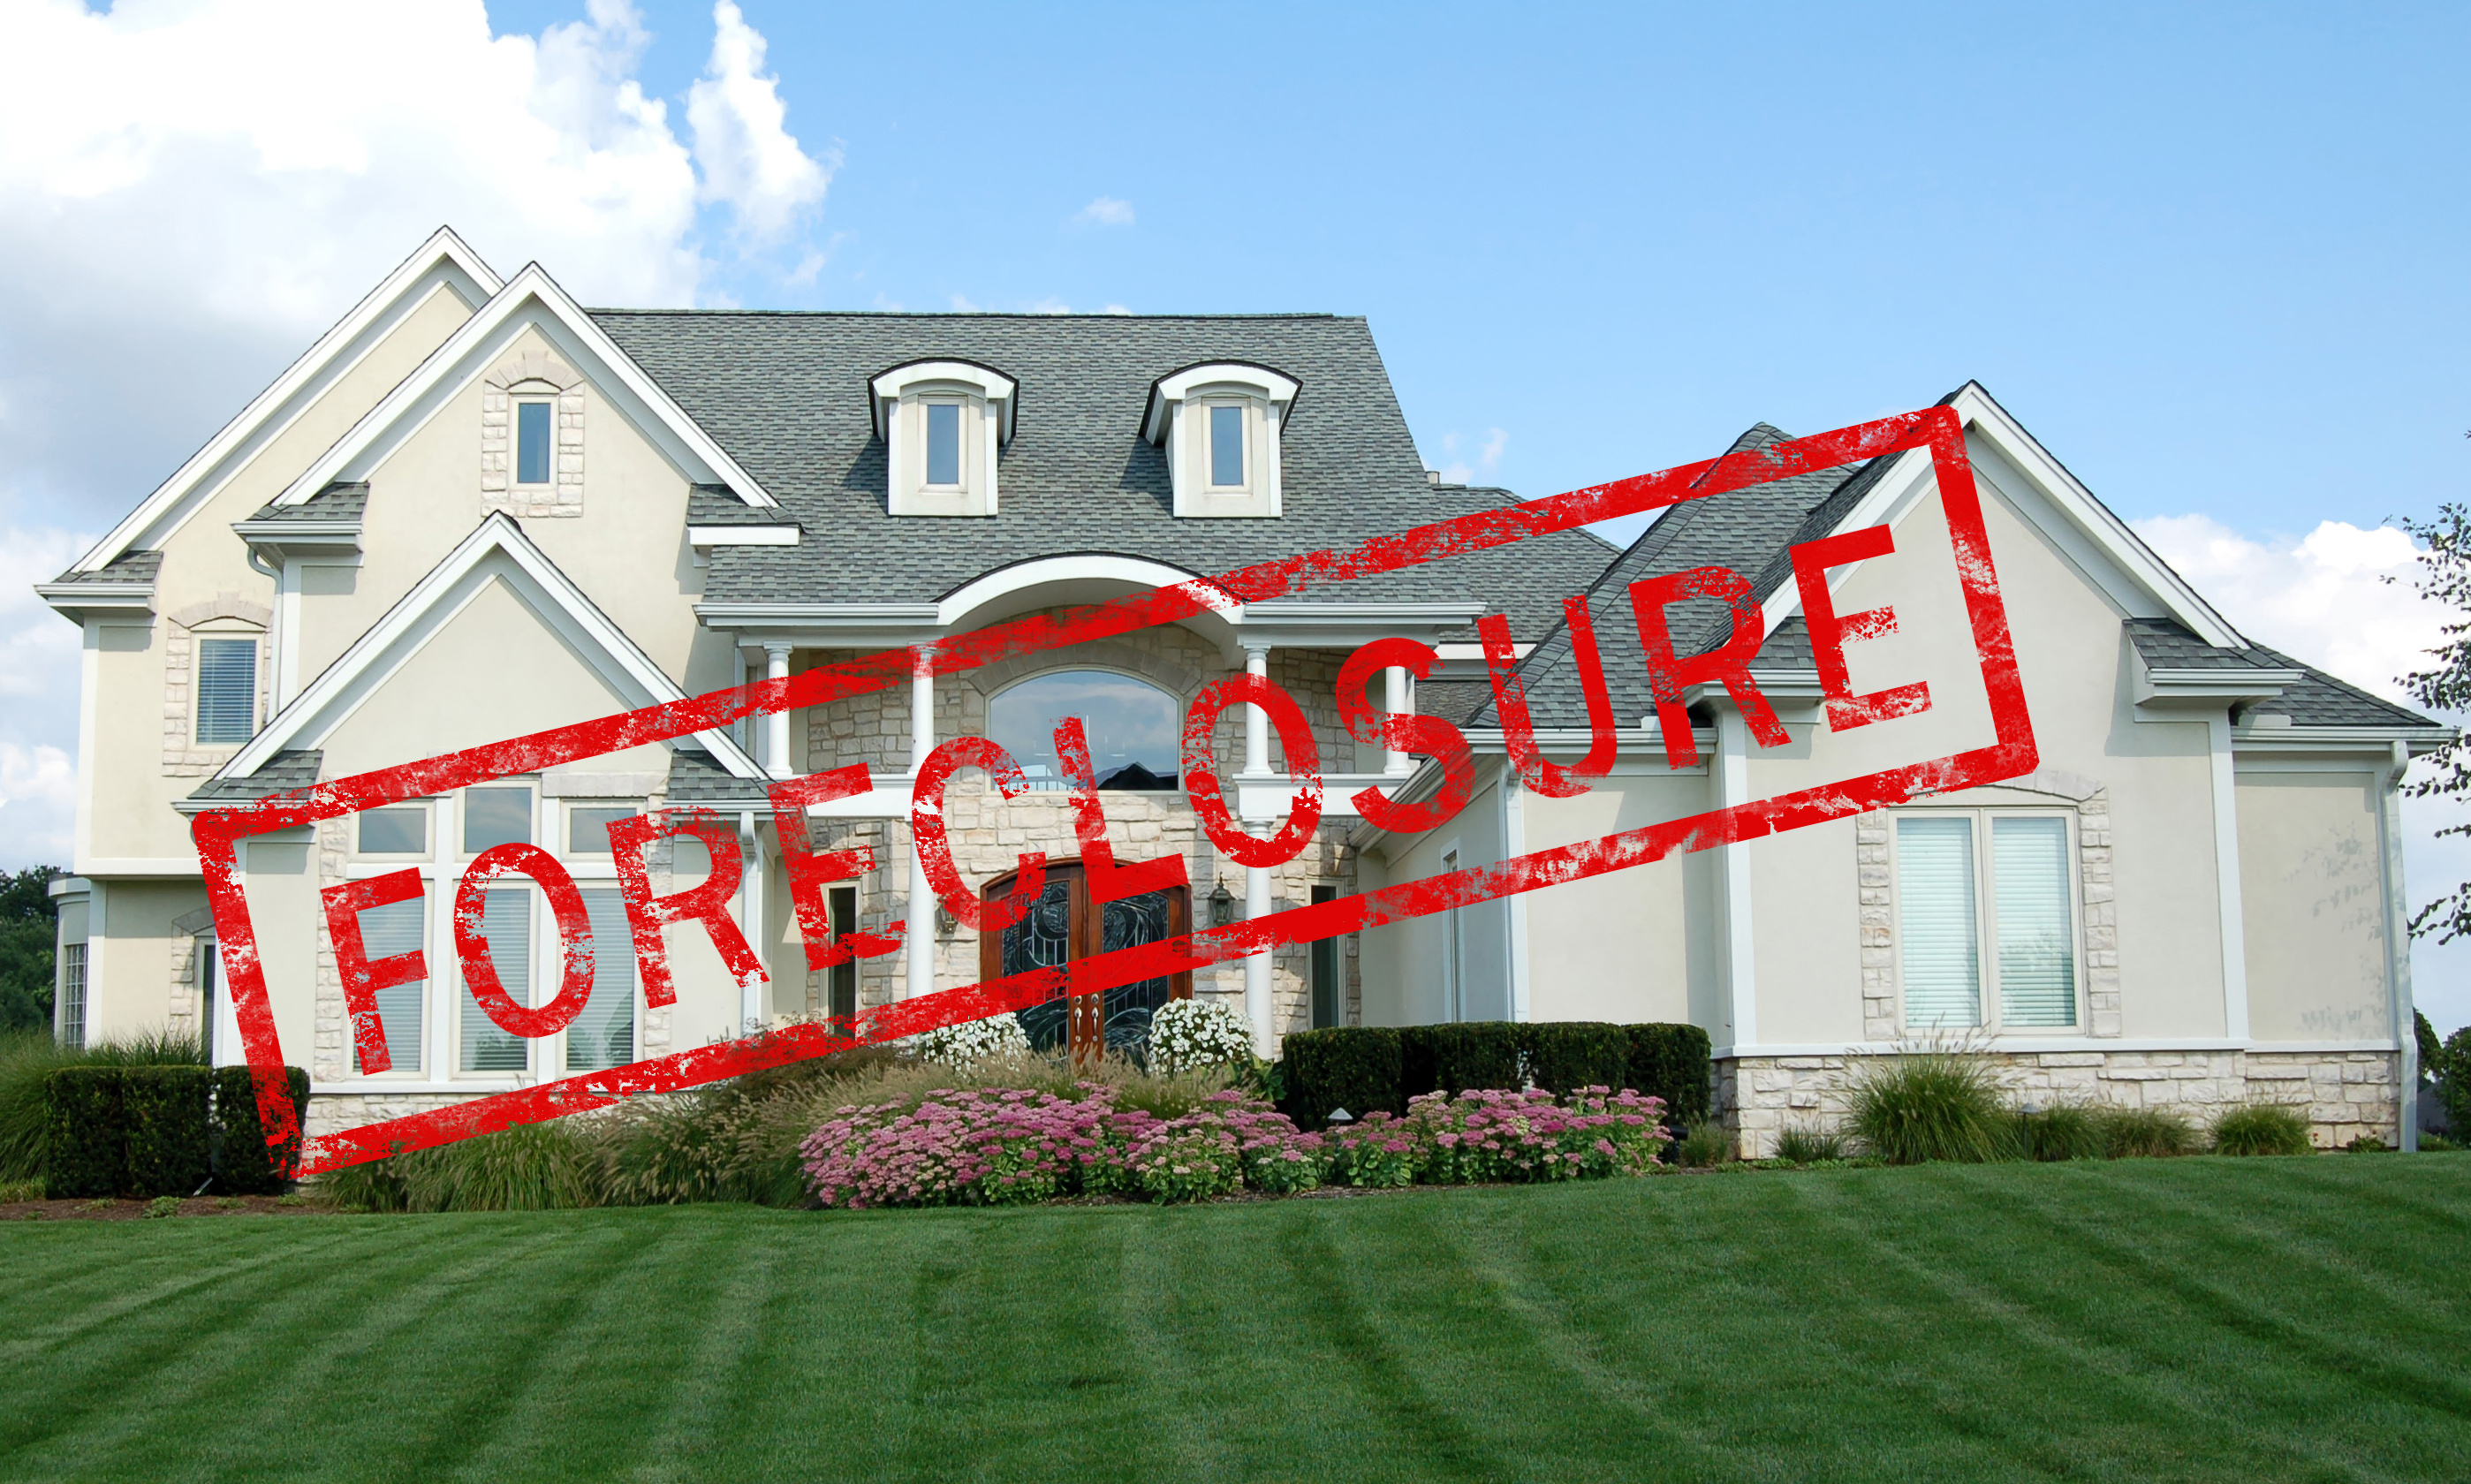 Call R.F.Robin Enterprises/Appraisals to order appraisals of Dupage foreclosures